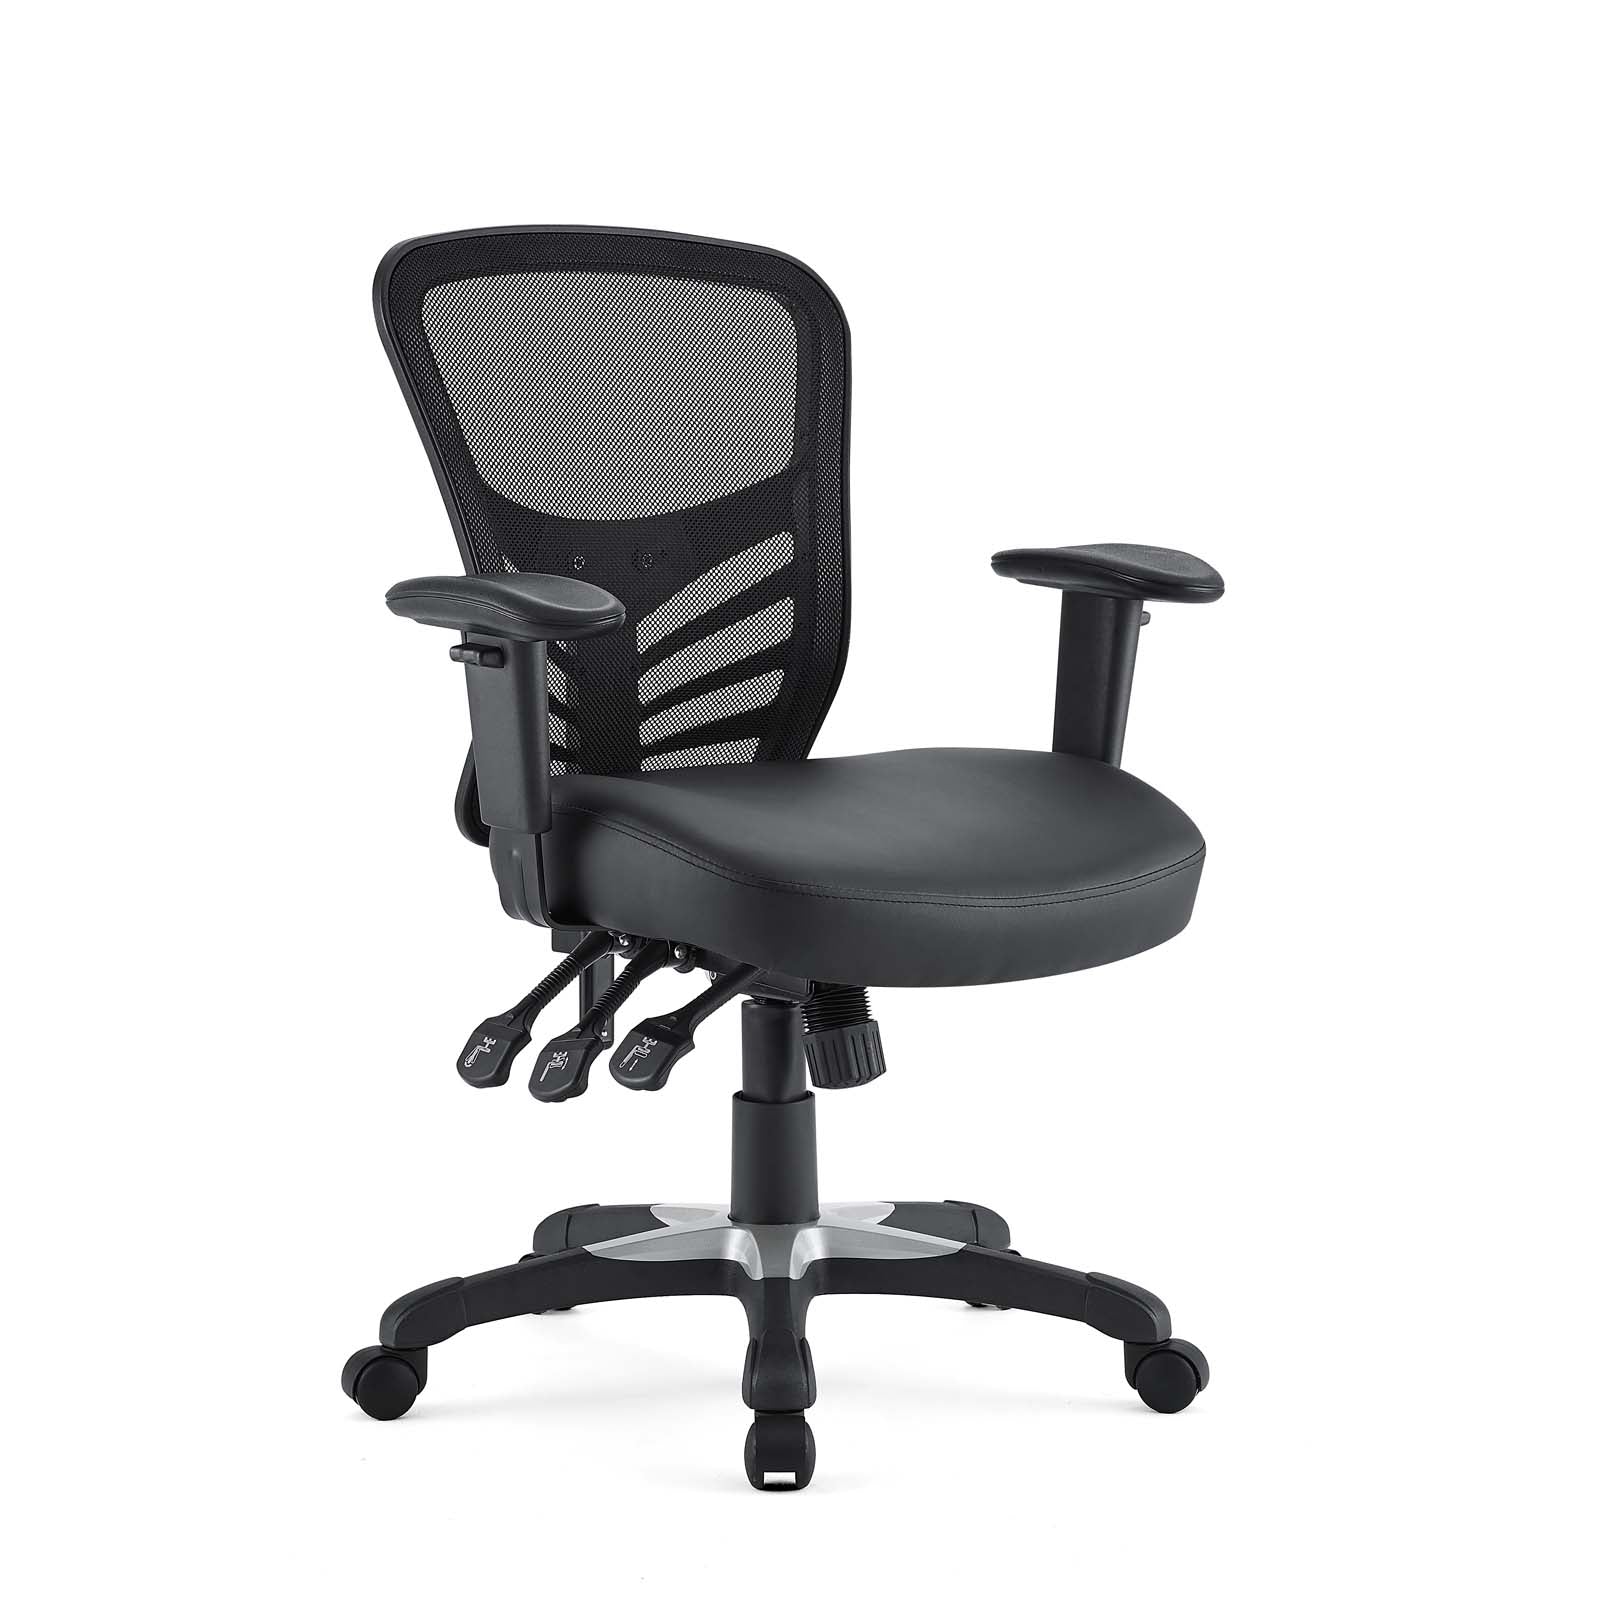 Stay Super-active with Articulate Vinyl Office Chair by BUILDMyplace